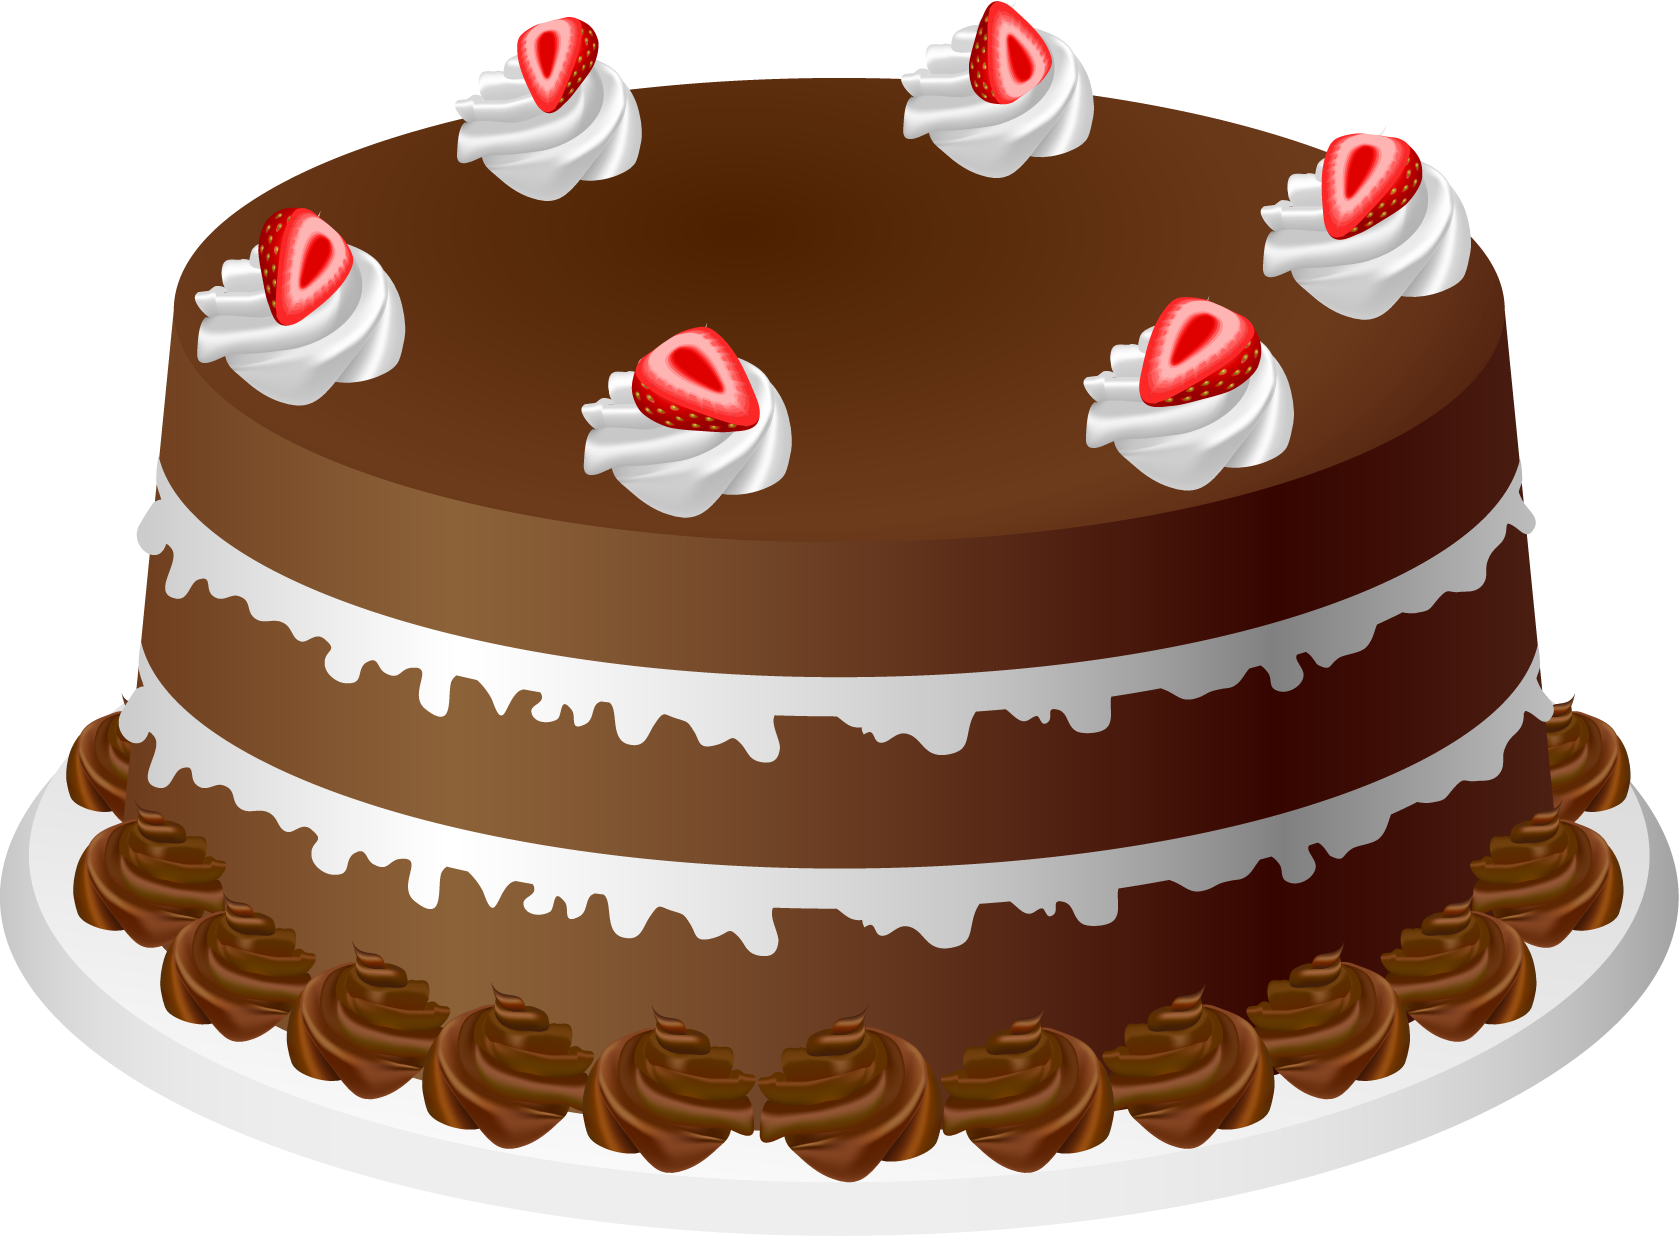 19,044 Birthday Cake Clip Art Images, Stock Photos, 3D objects, & Vectors |  Shutterstock